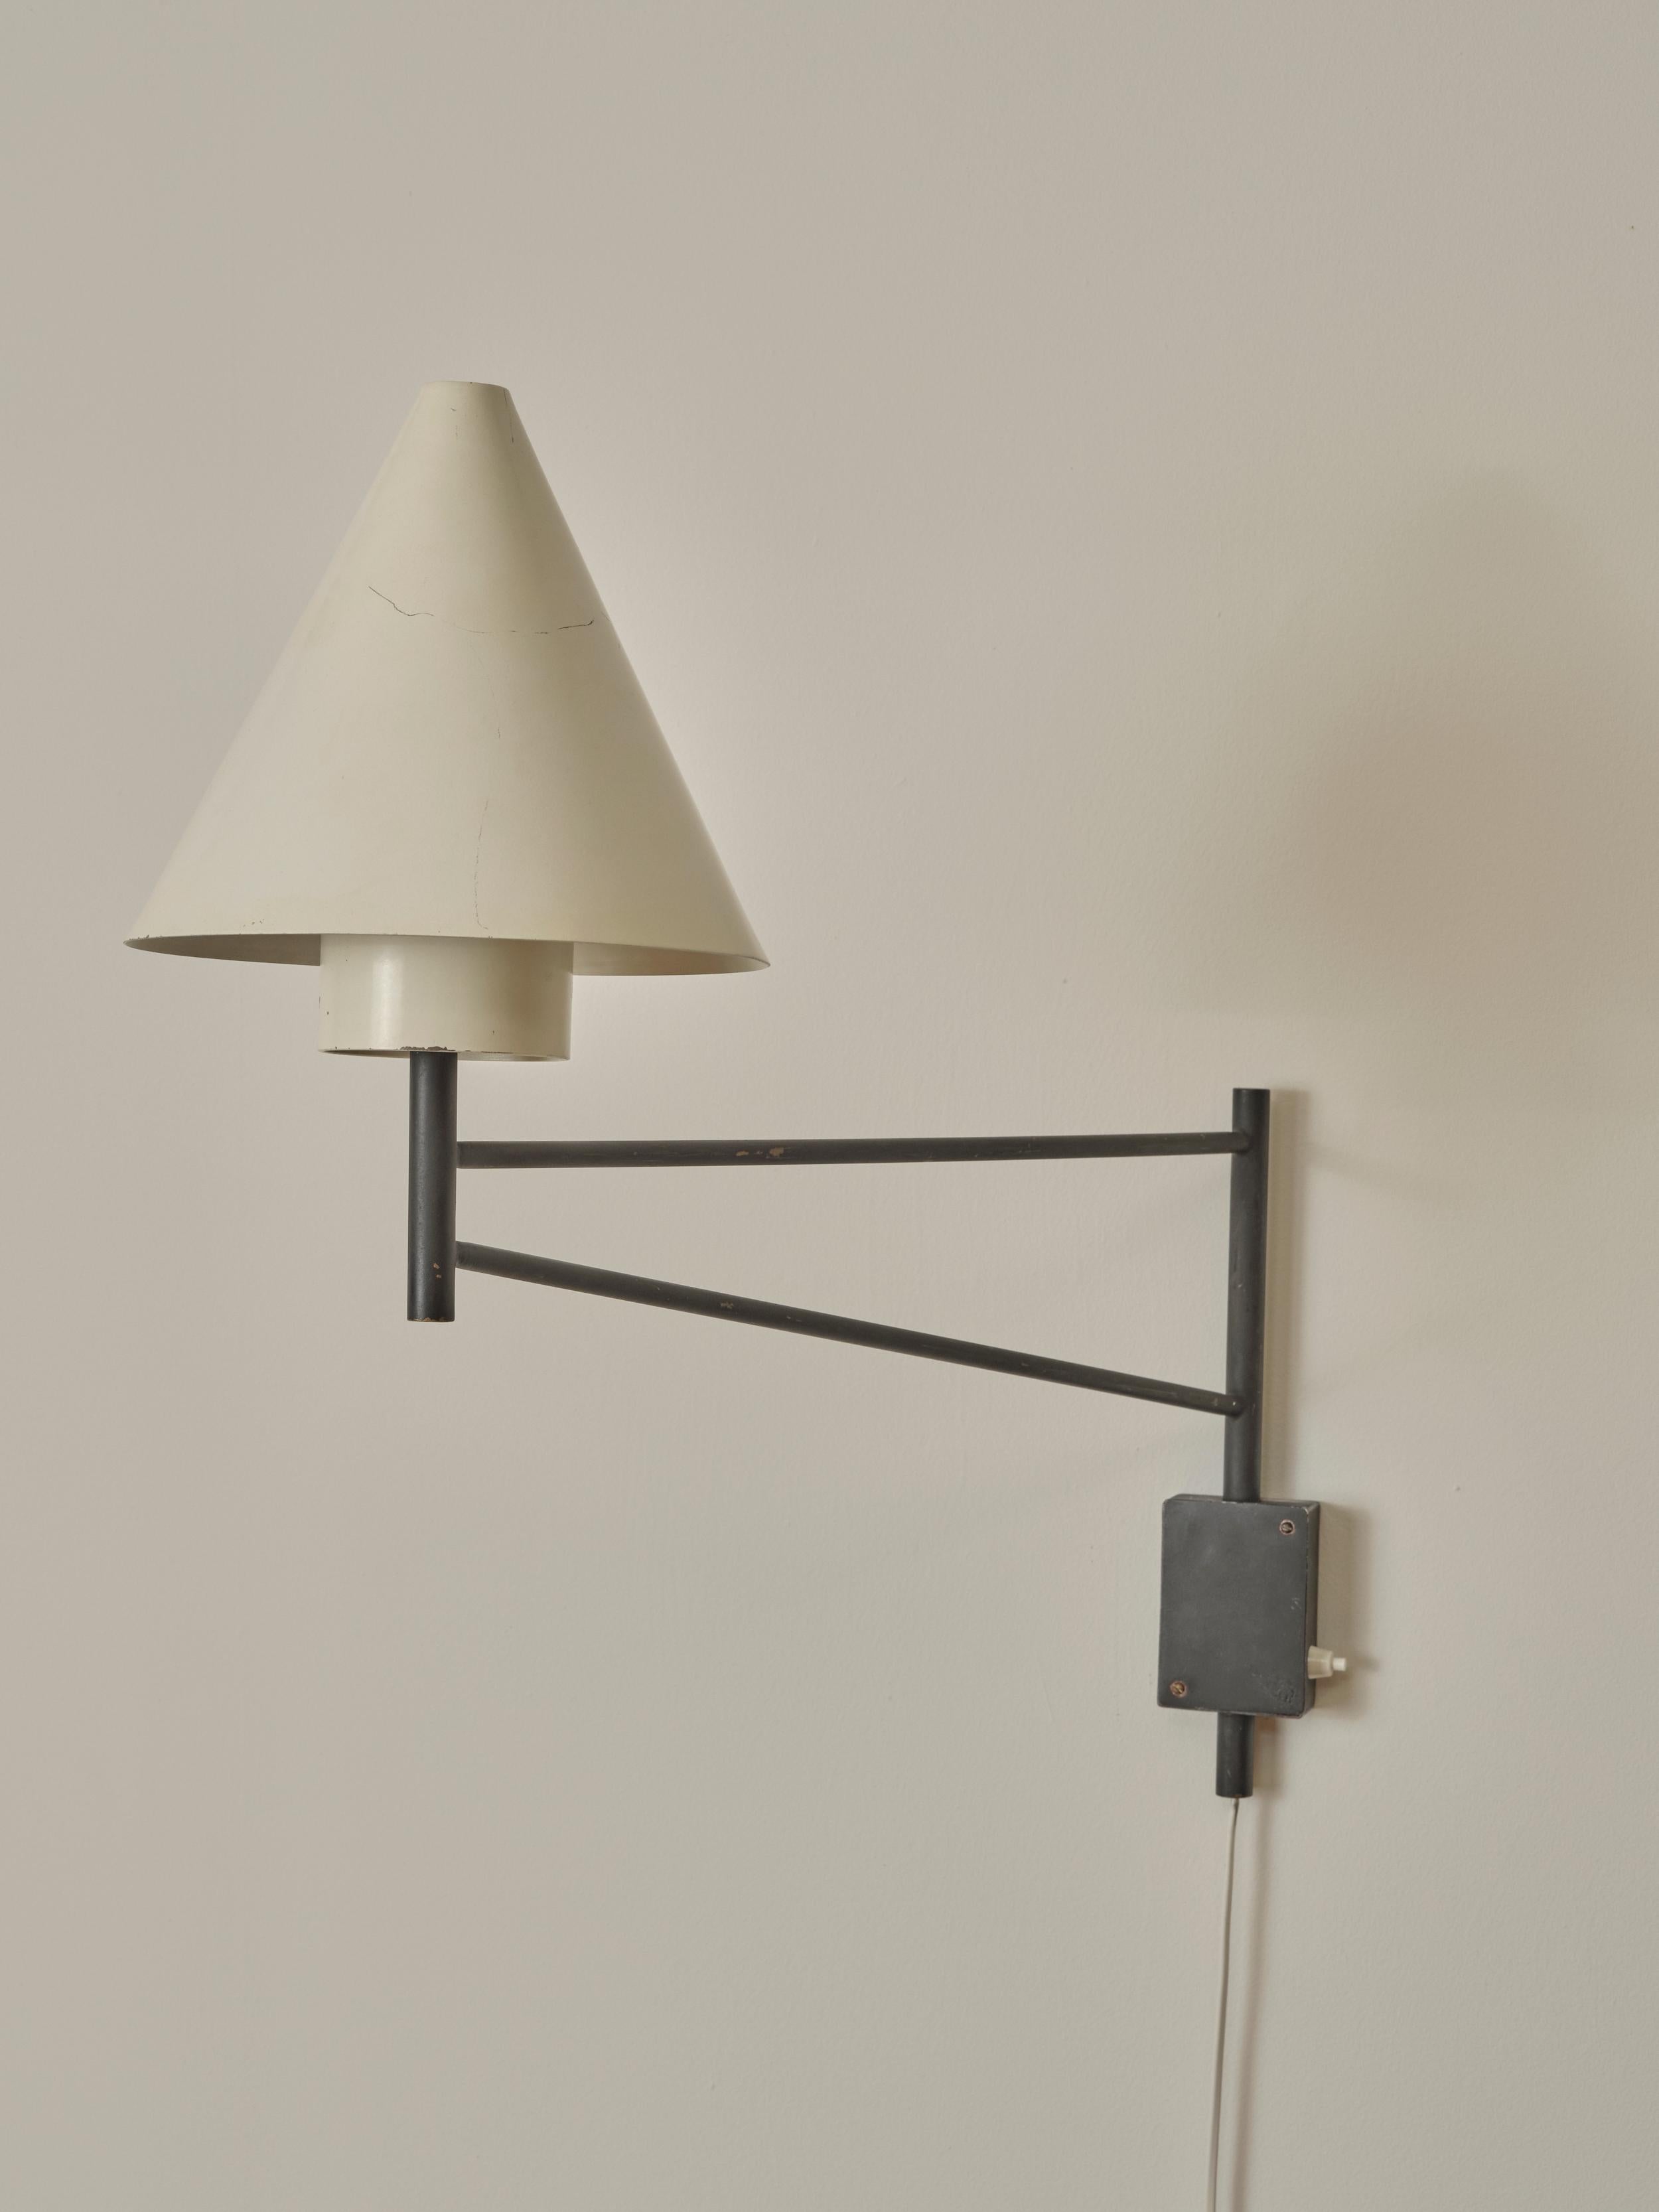 Swivel Wall Lamp attr. To Eje Ahlgren for Luco. Its core elements include a sturdy metal swivel arm and a white cone-shaped metal shade. The cone-shaped metal shade helps direct and diffuses light effectively. 